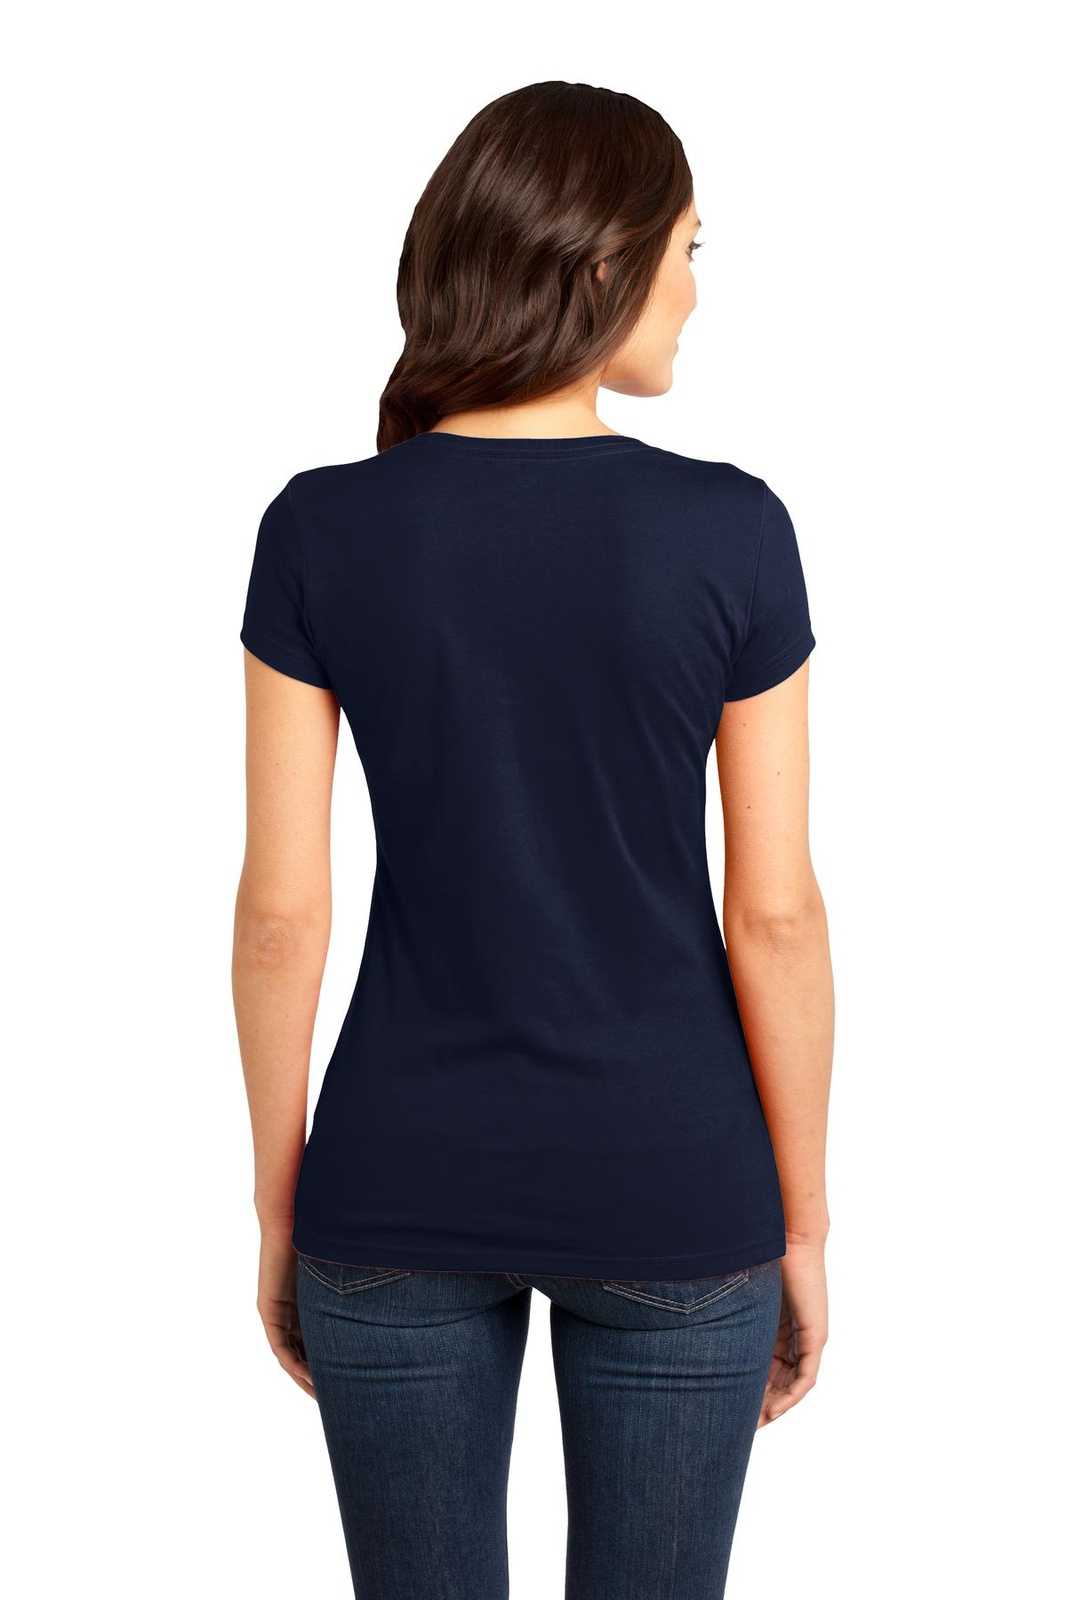 District DT6001 Women's Fitted Very Important Tee - New Navy - HIT a Double - 1